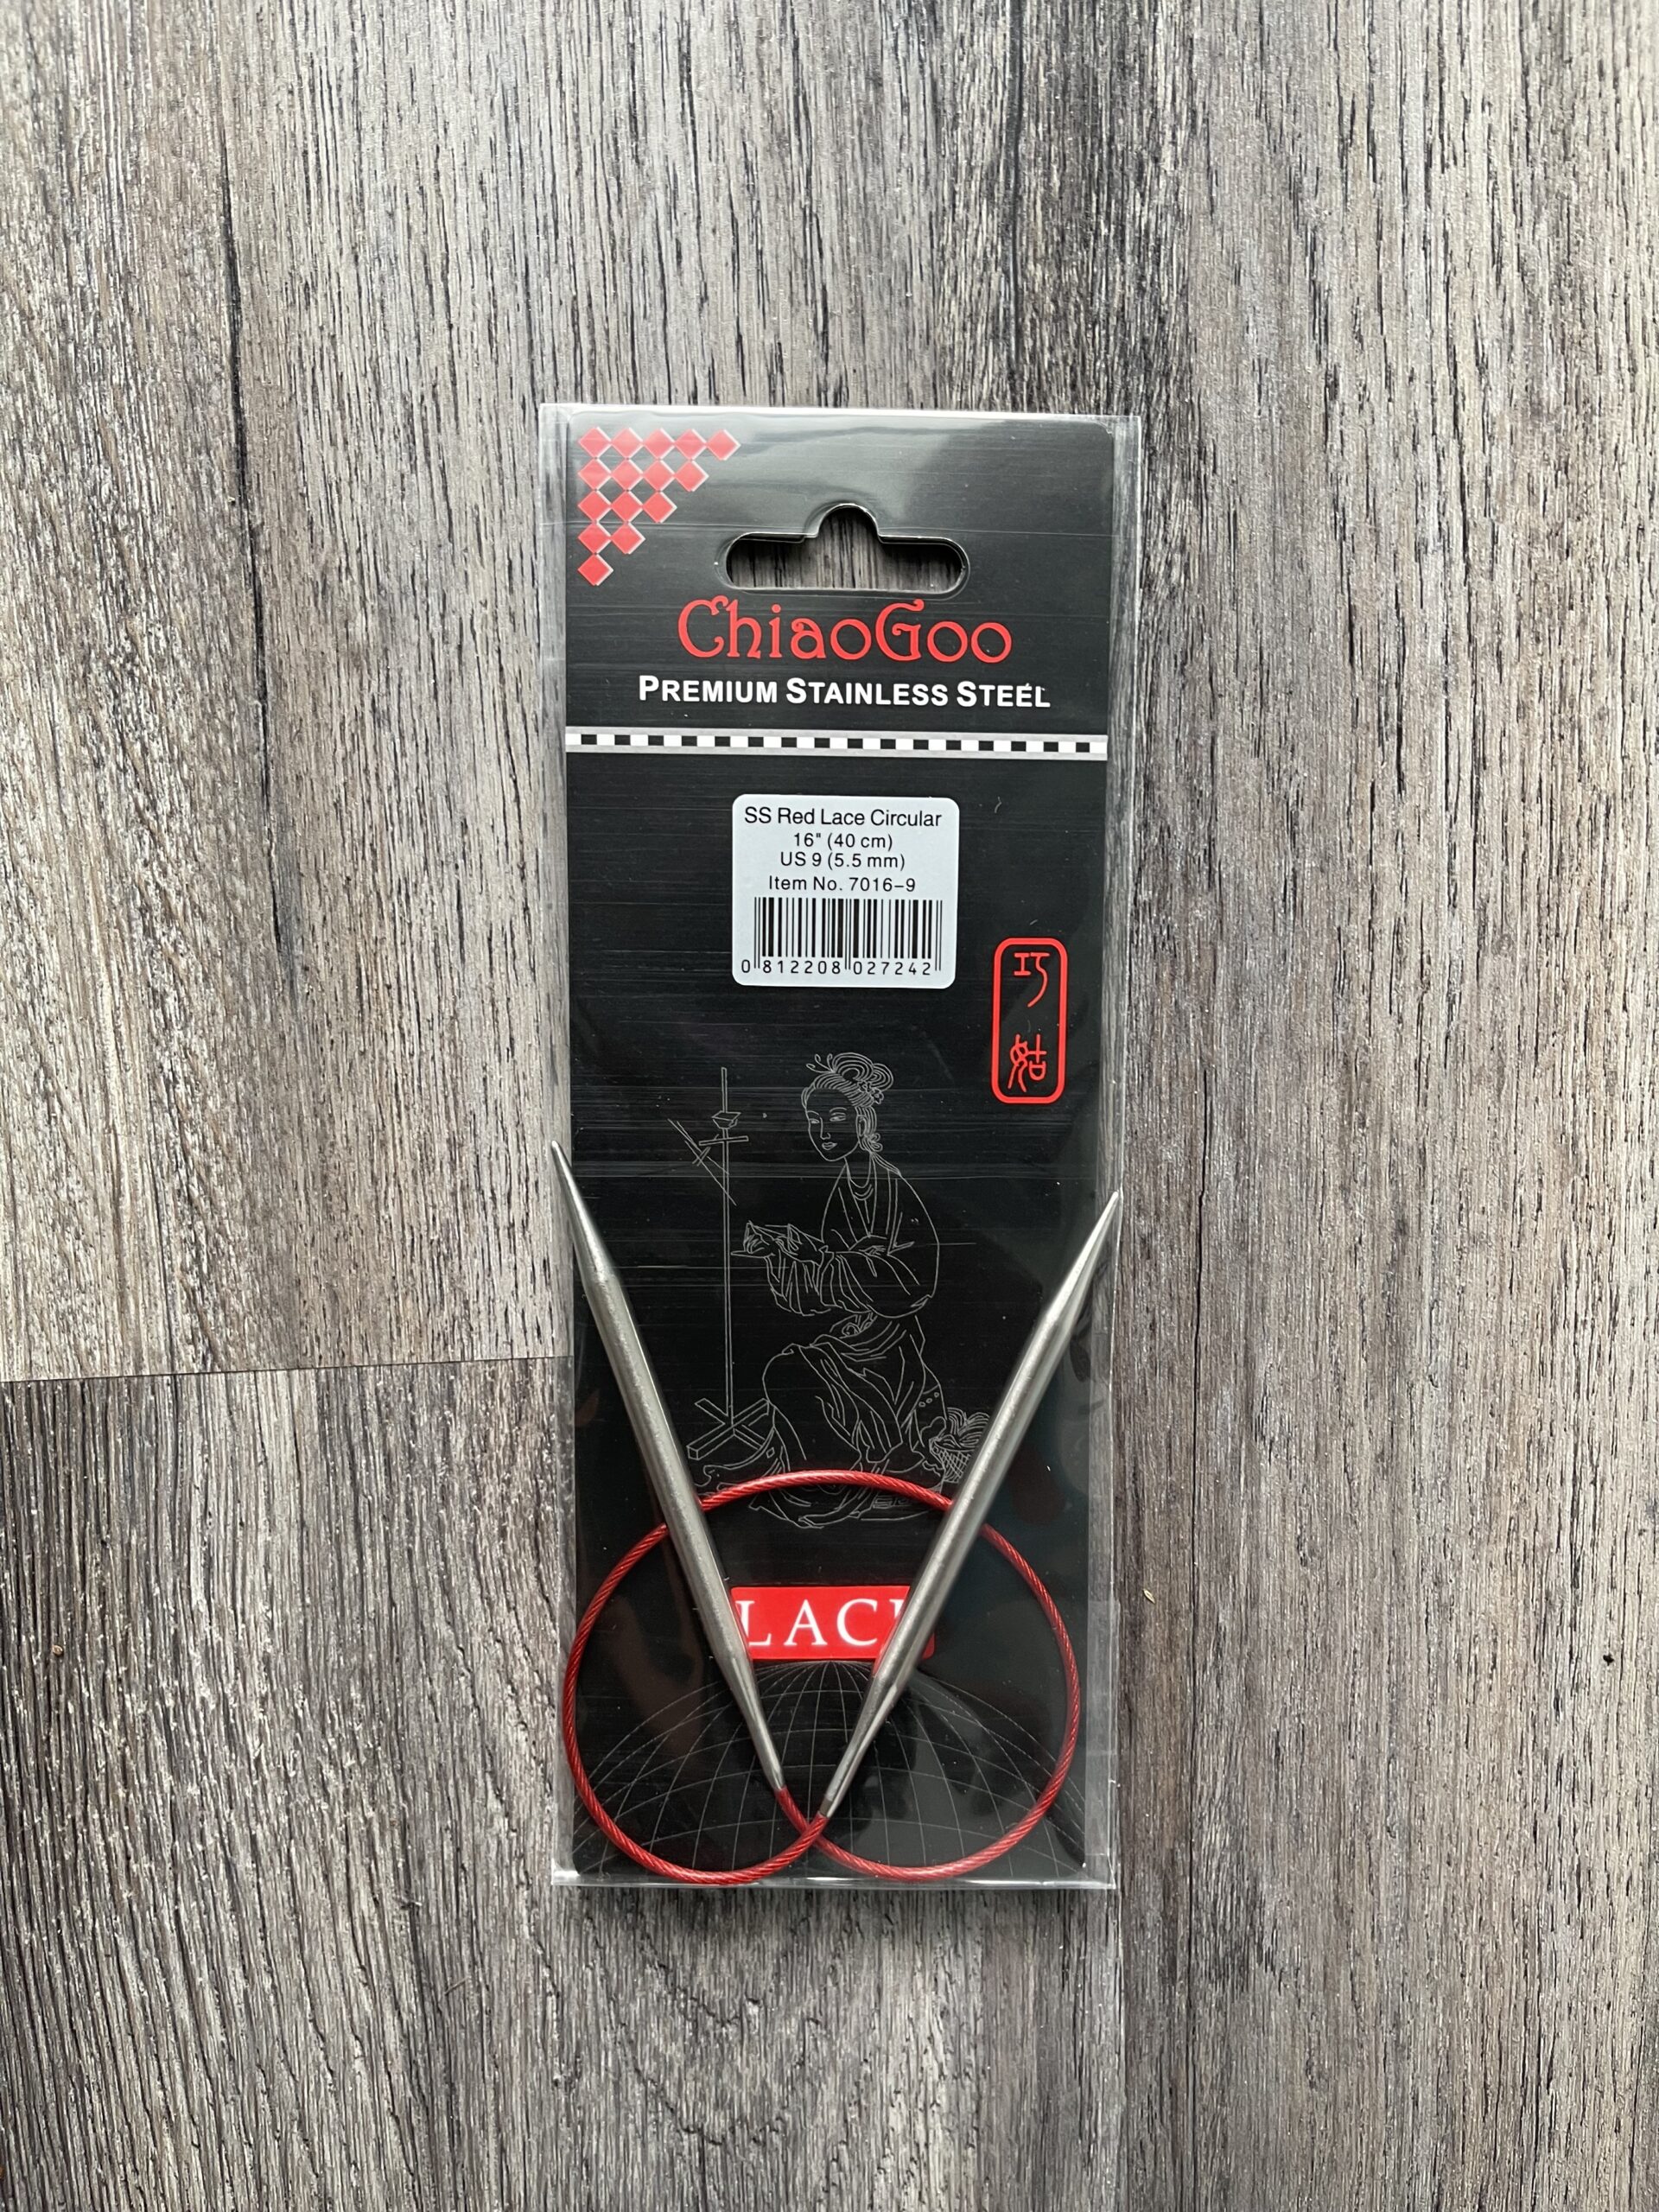 ChiaoGoo Red Lace Stainless Circular Knitting Needles 40